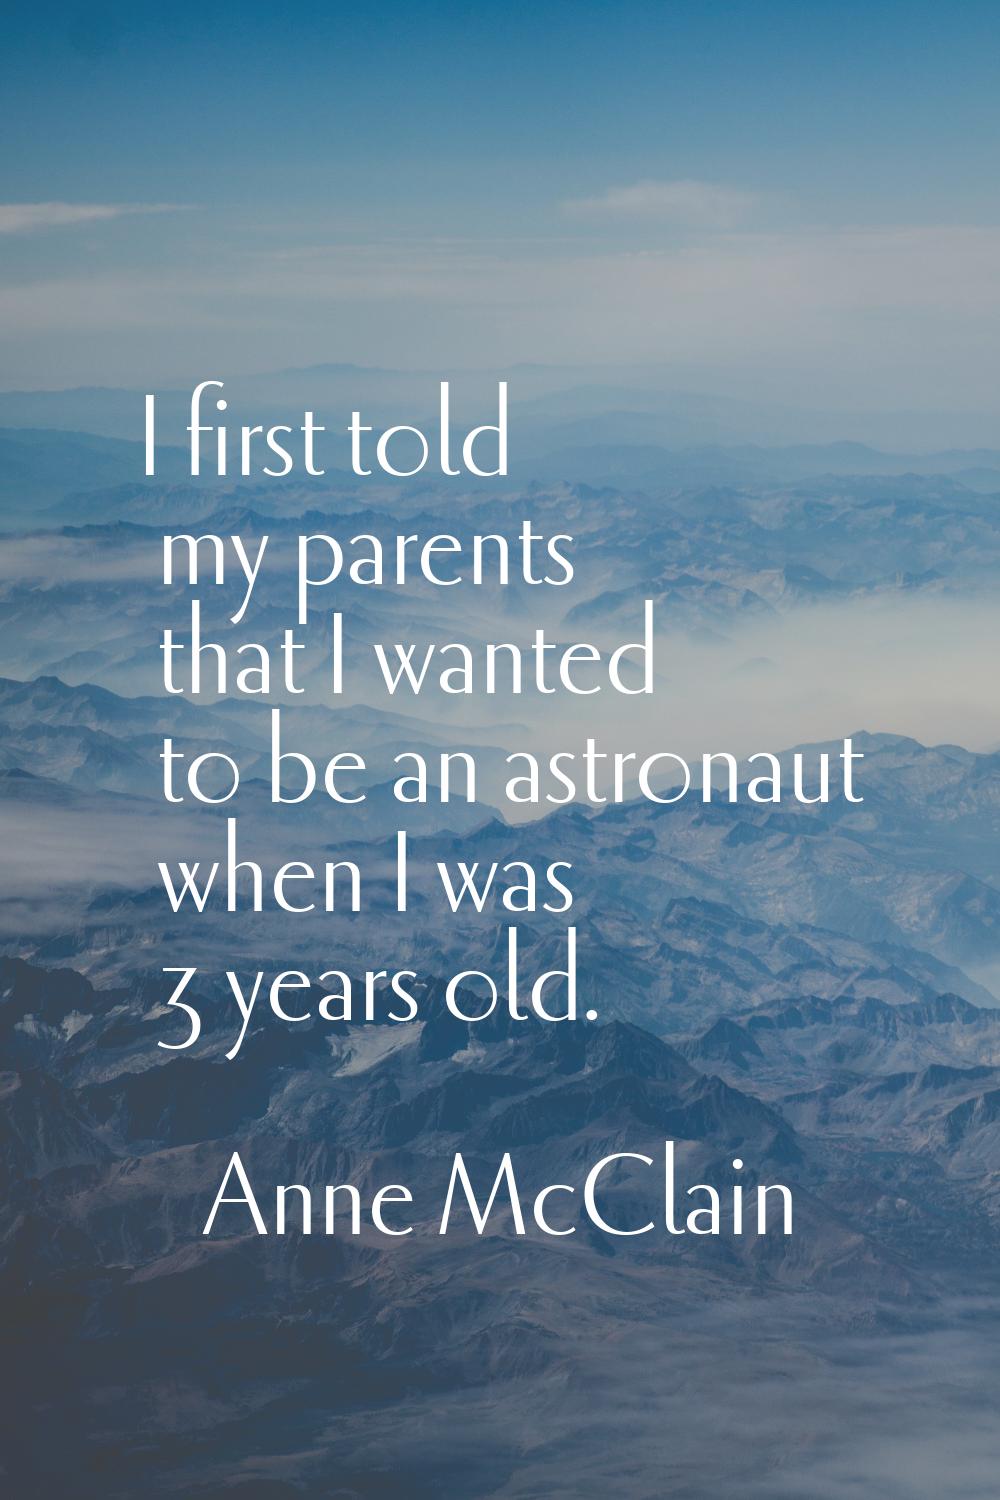 I first told my parents that I wanted to be an astronaut when I was 3 years old.